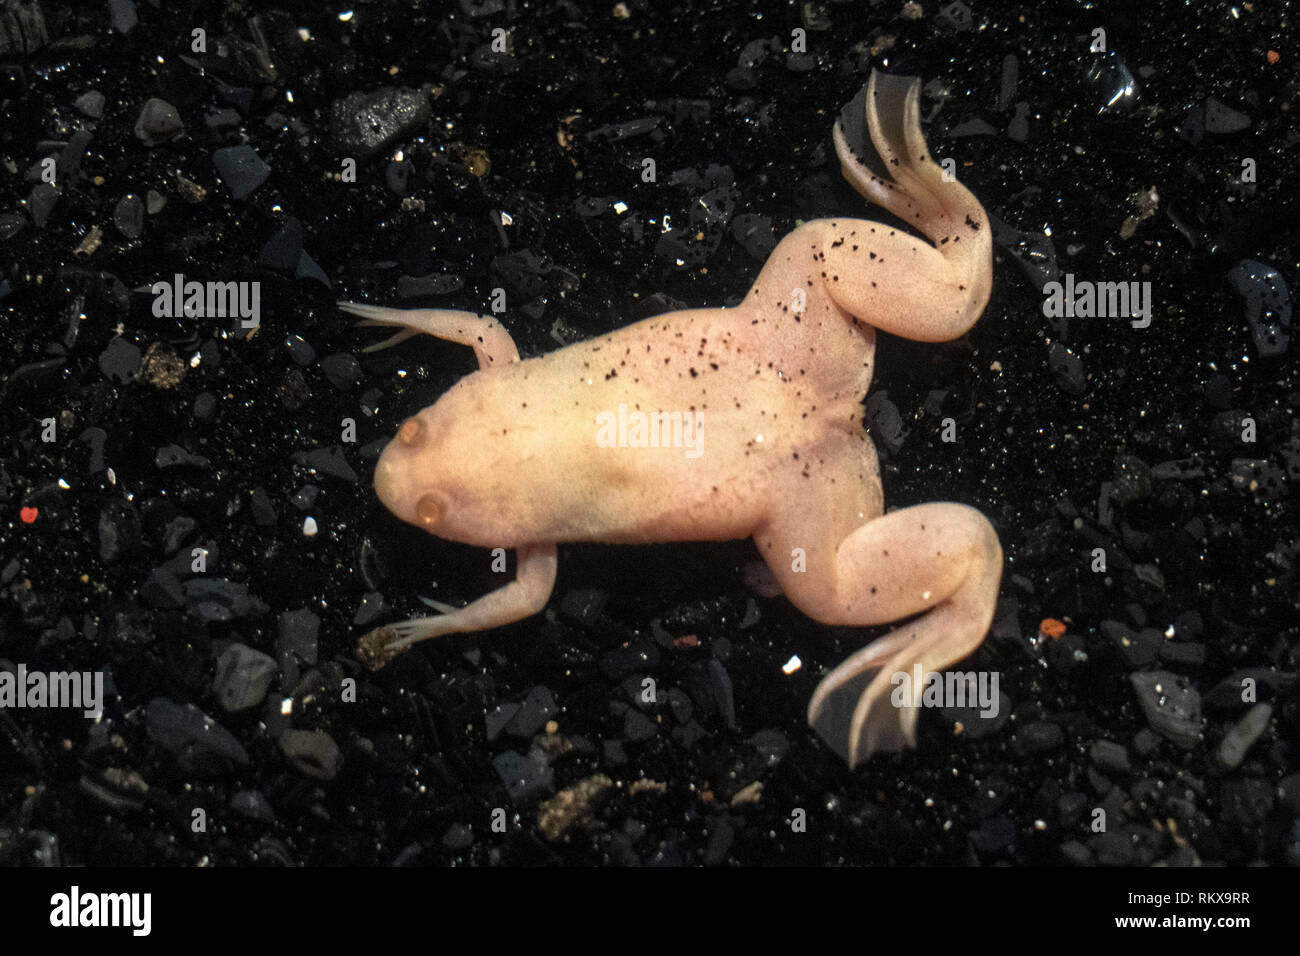 Albino frog africa close up detail Stock Photo